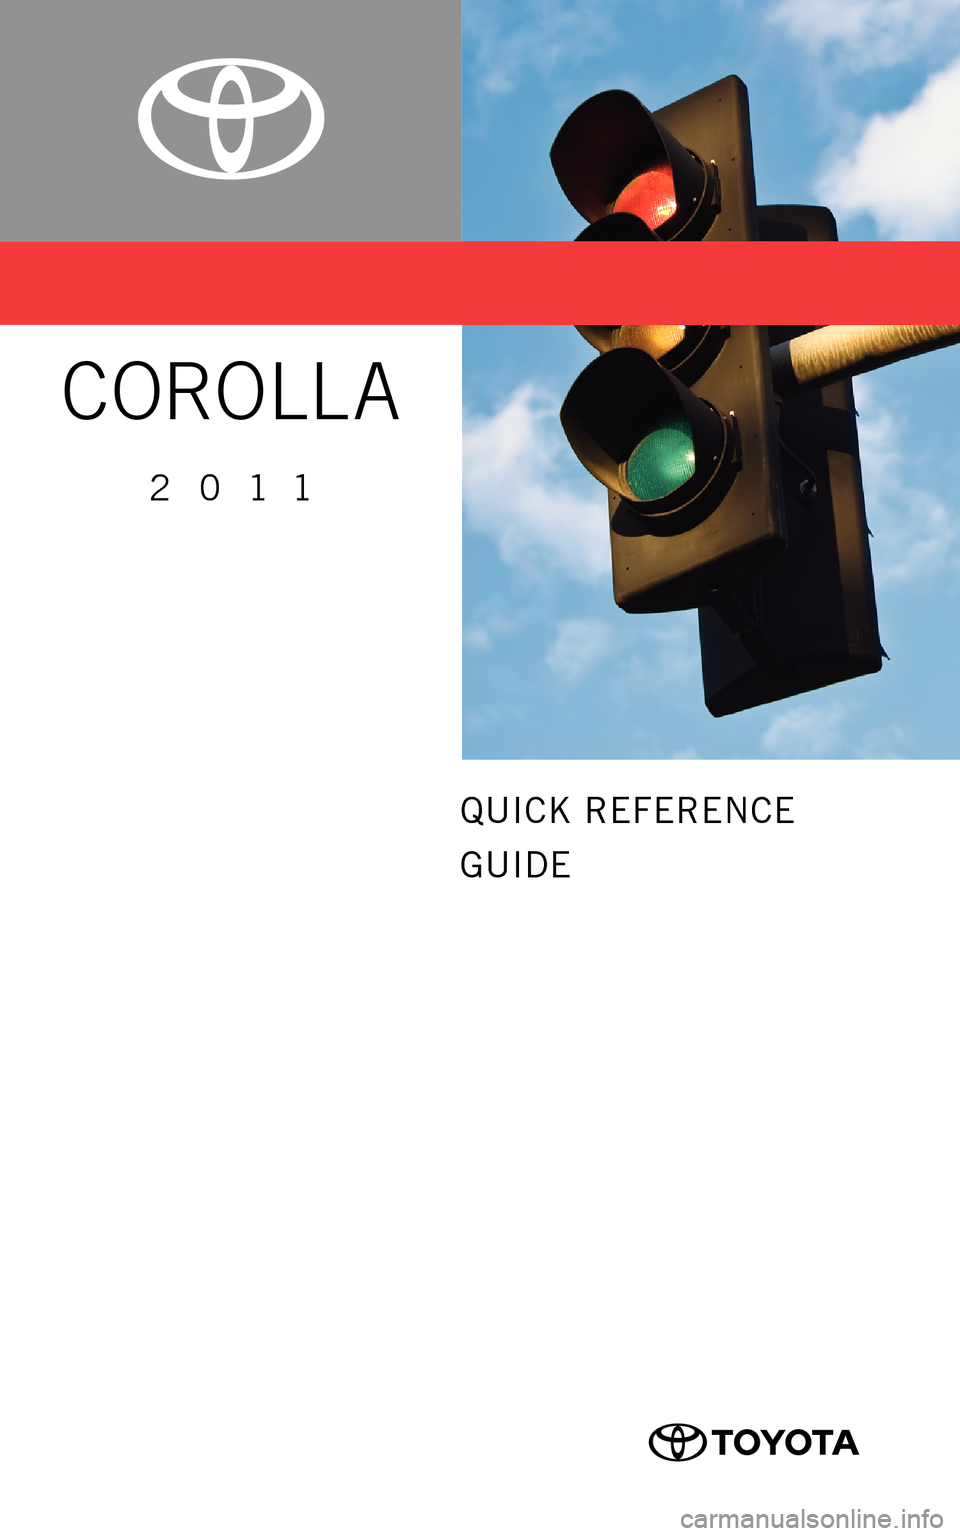 TOYOTA COROLLA 2011 10.G Quick Reference Guide QUICK REFERENCE 
GUIDE
COROLLA
2011
414868M1.indd     1
414868M1.indd   1 11/17/10   6:51  PM
11/17/10   6:51 PM 